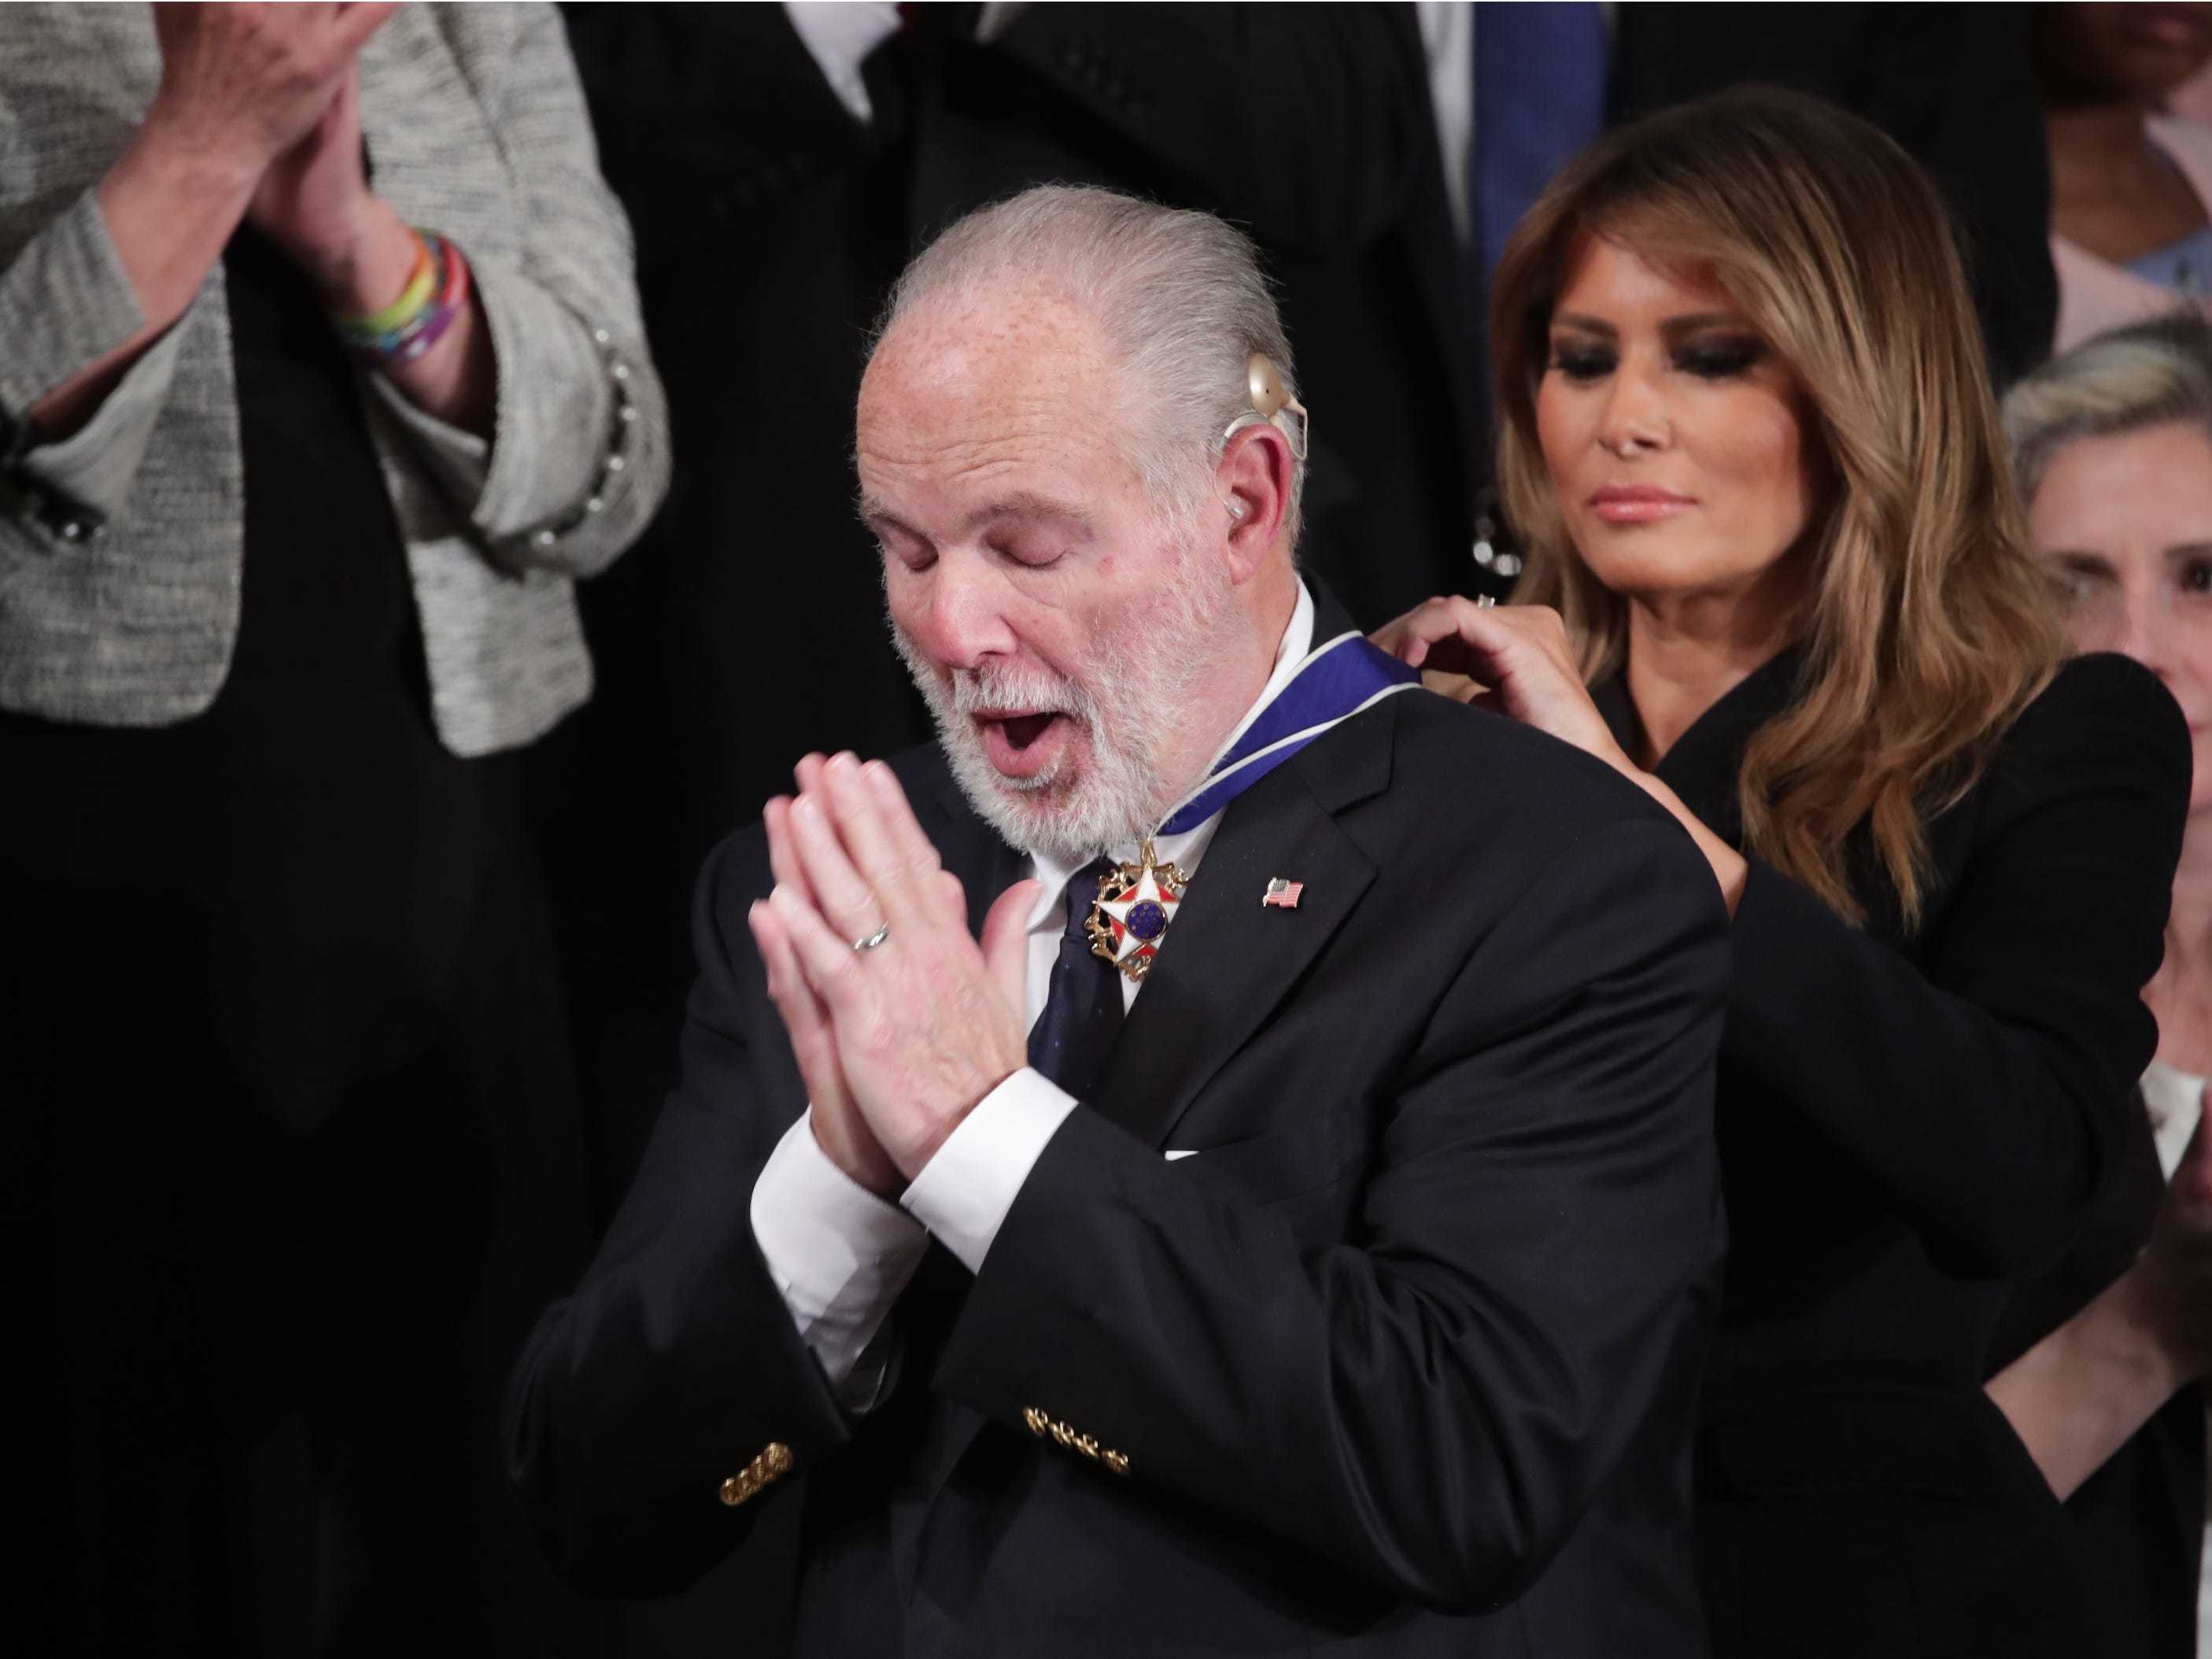 First lady Melania Trump places a Presidential Medal of Freedom to Rush Limbaugh during U.S. President Donald Trump